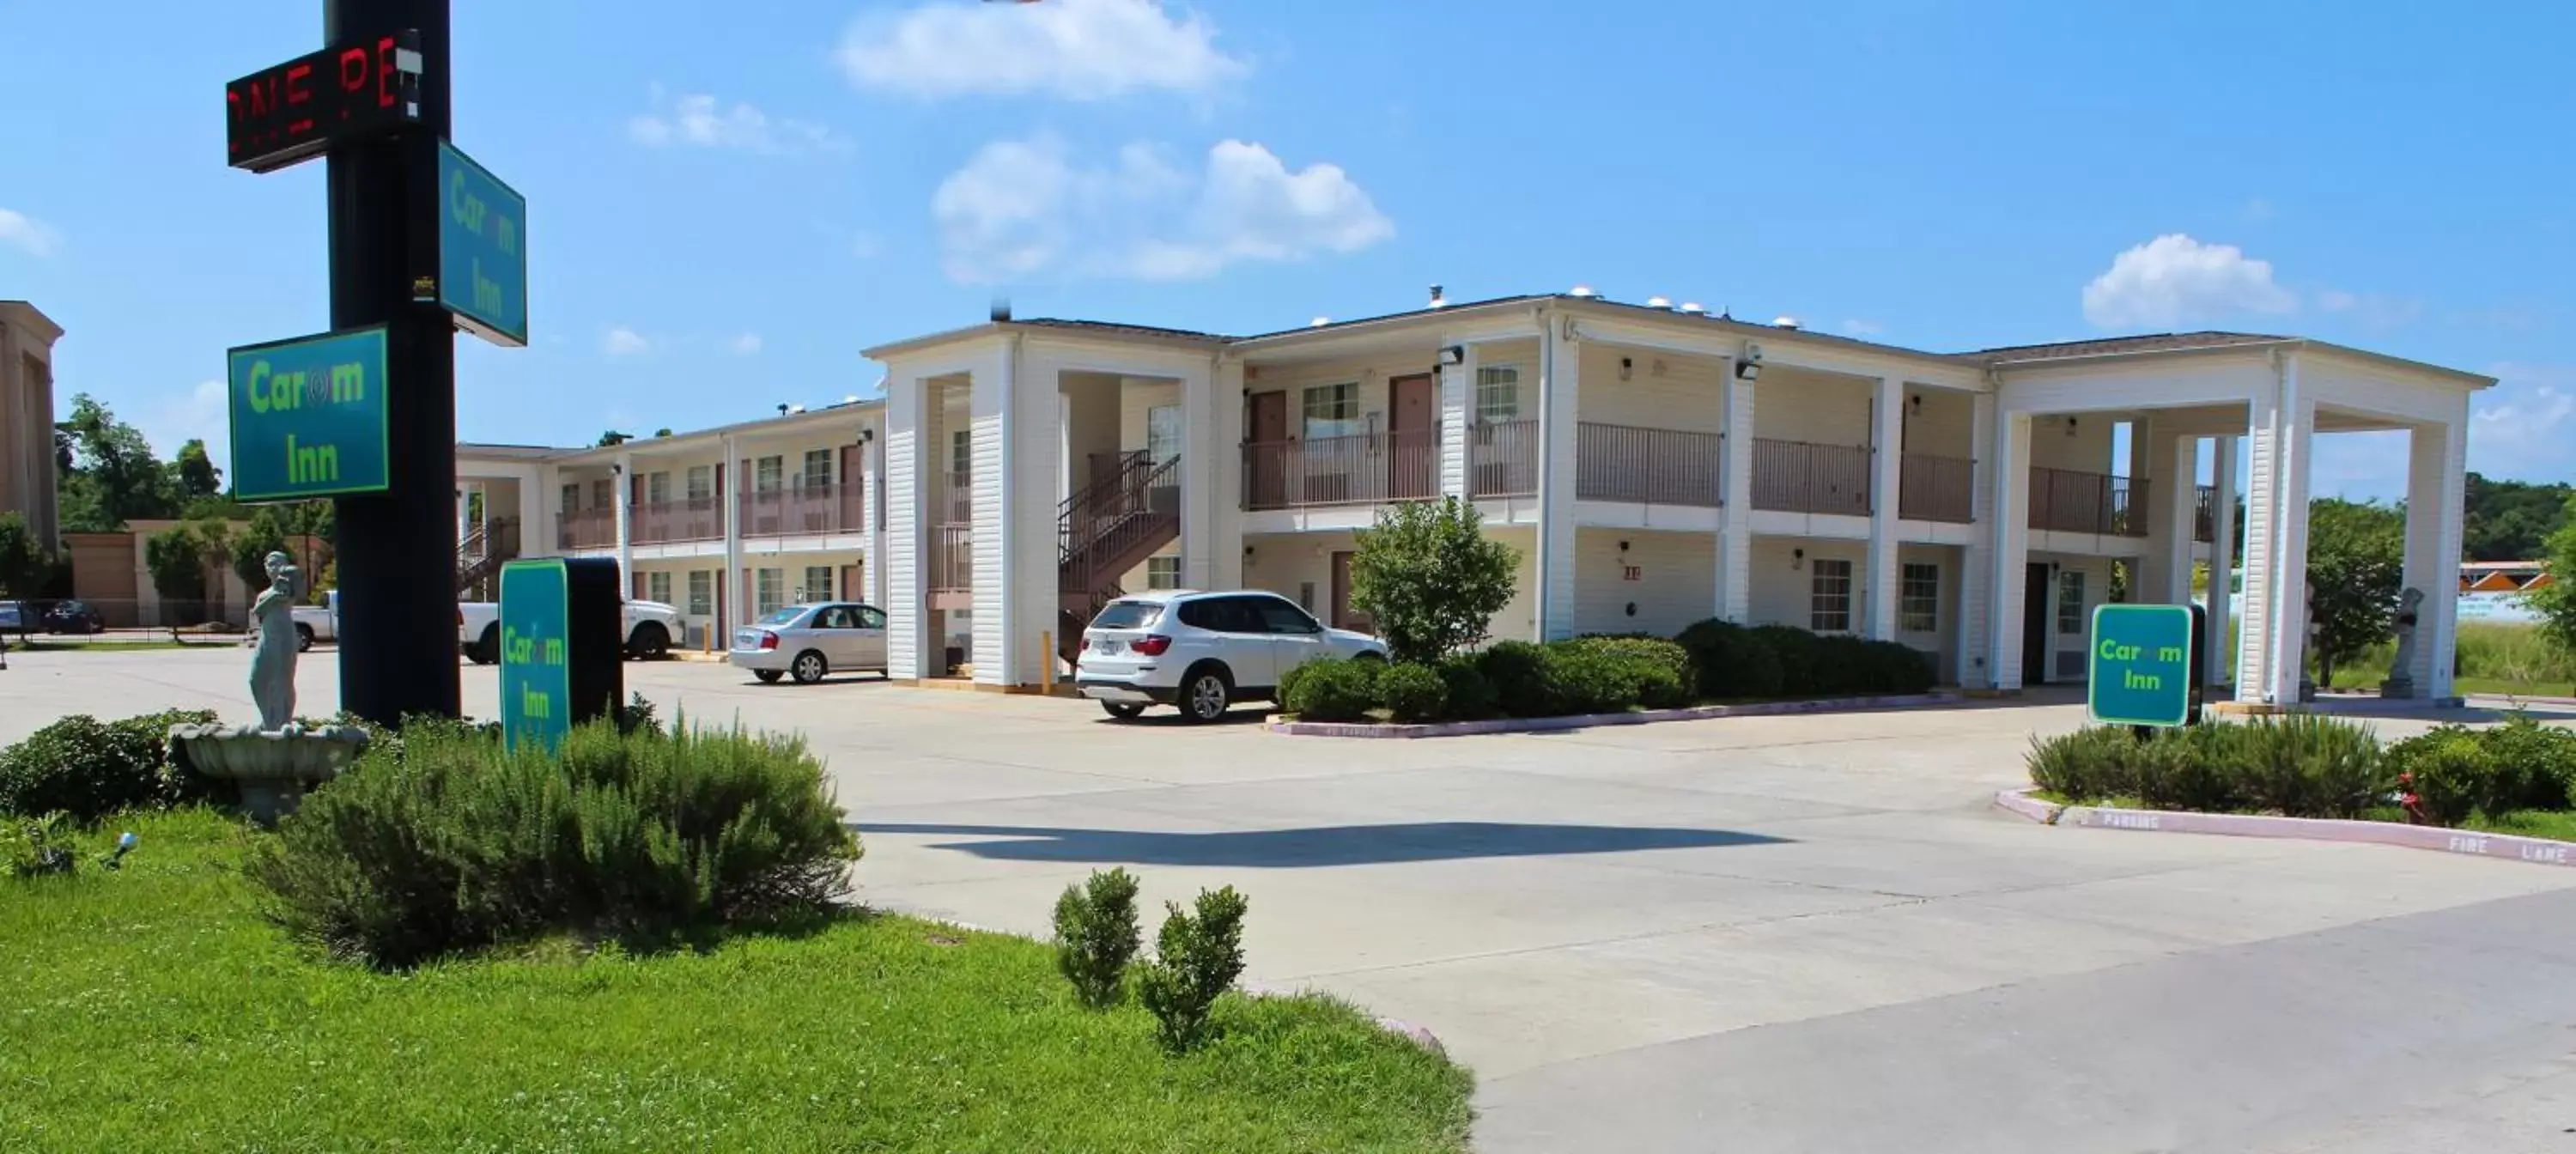 Facade/entrance, Property Building in Carom Inn a Travelodge by Wyndham Denham Springs-Baton Rouge